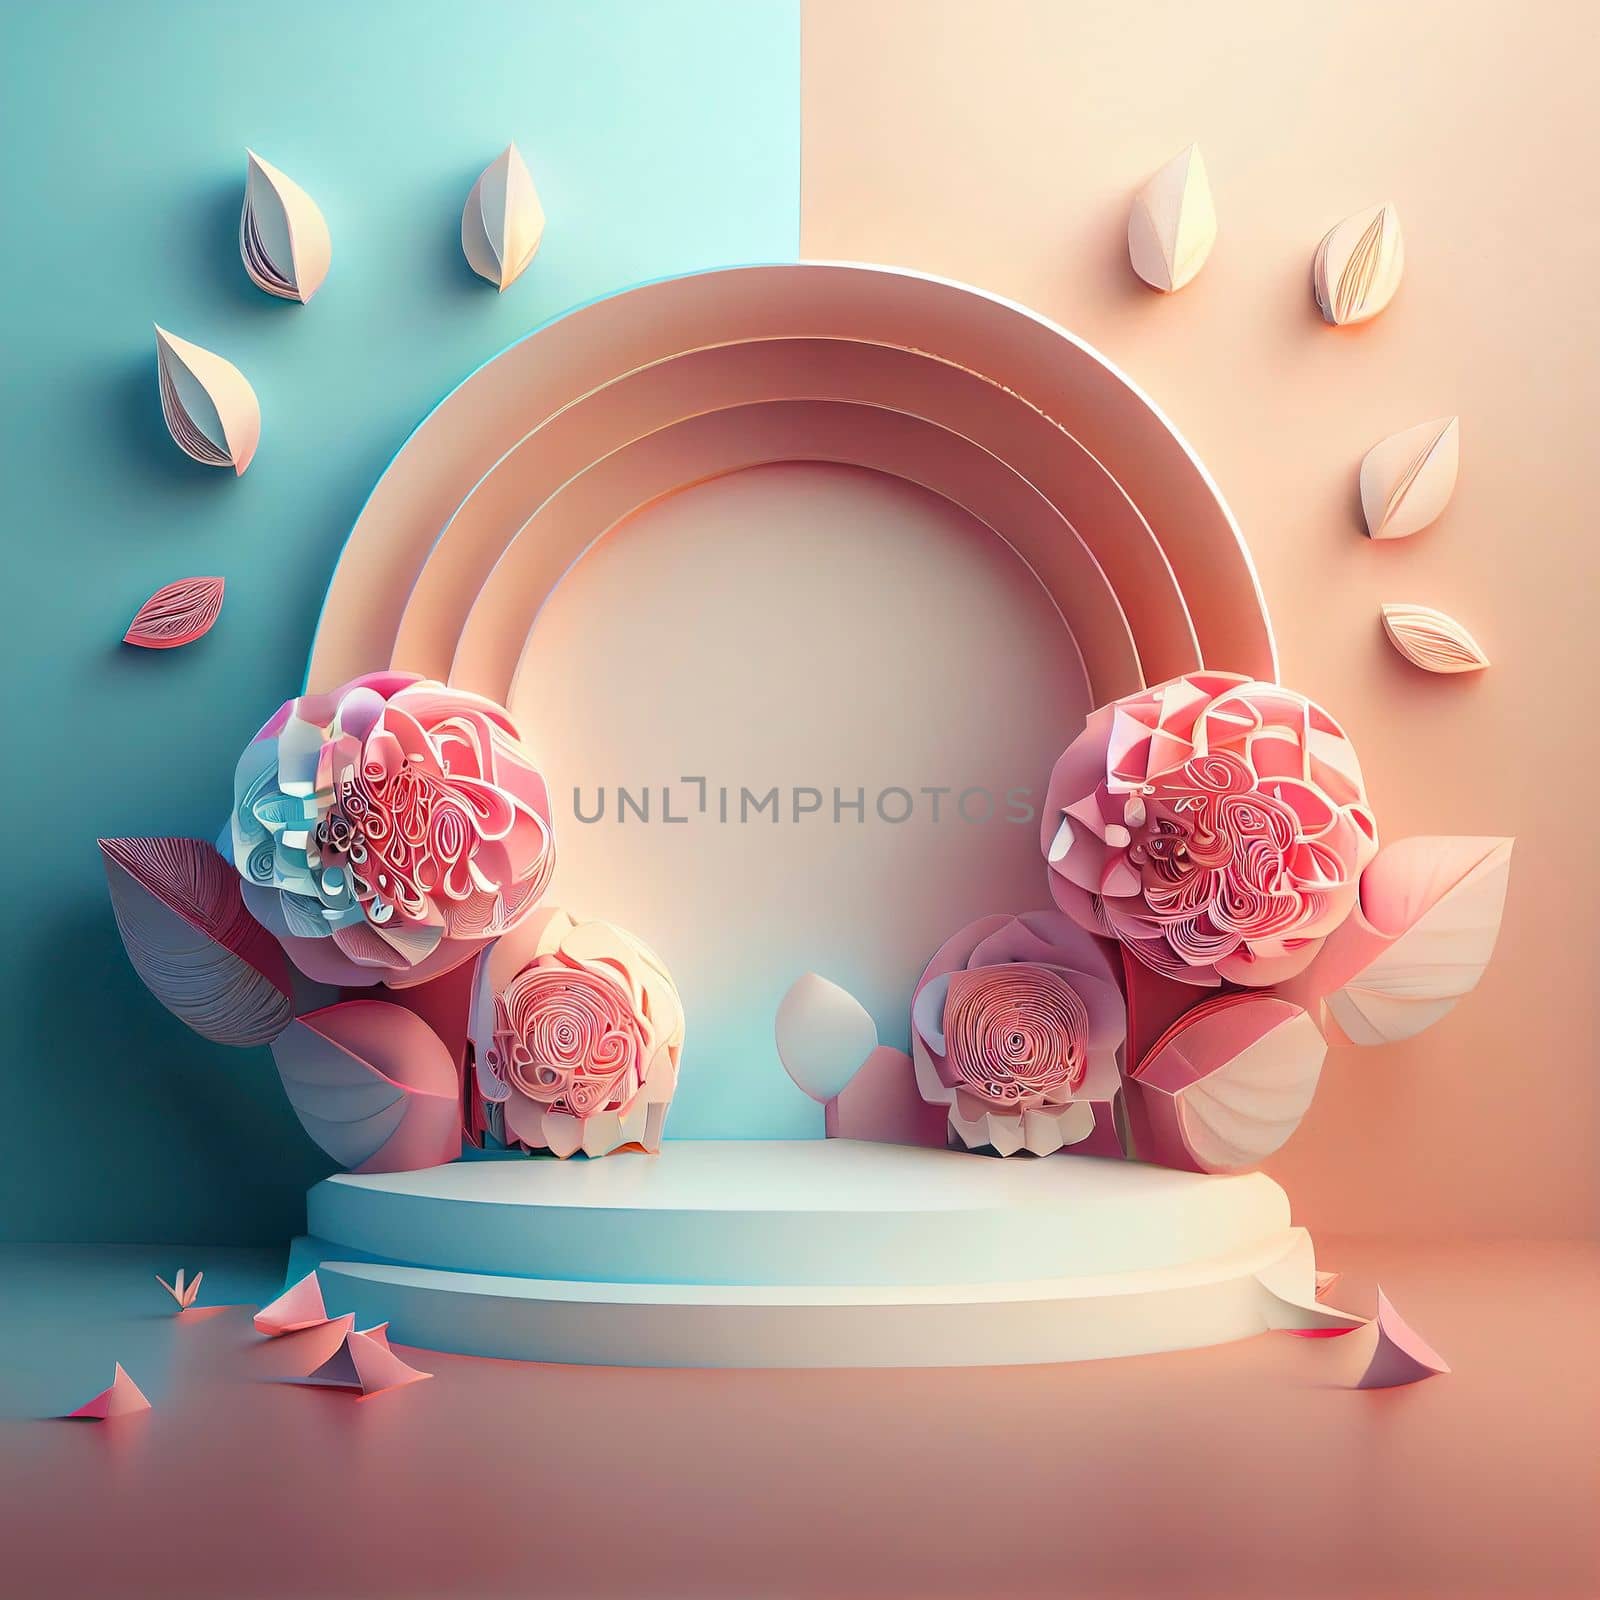 Pink podium 3d illustration for product display by templator